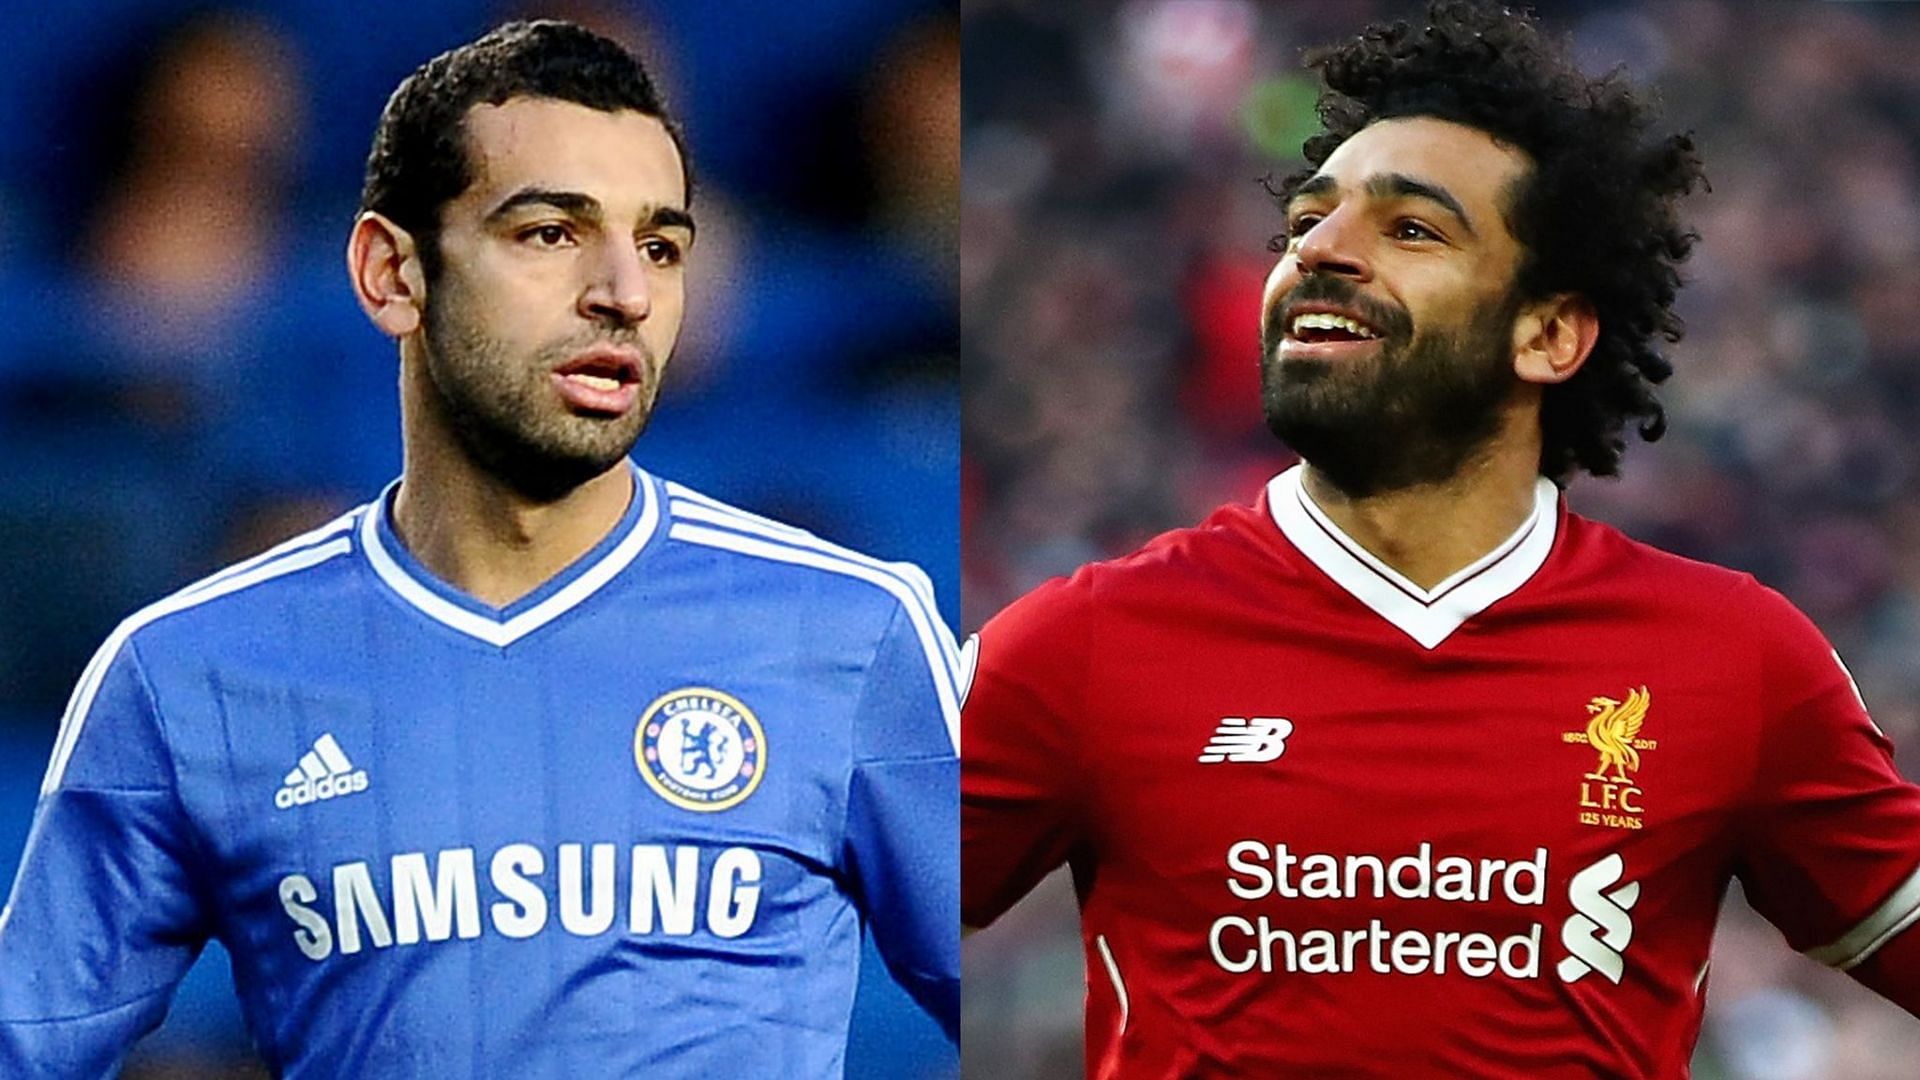 Mohamed Salah established himself as one of the best players in the world with Liverpool.